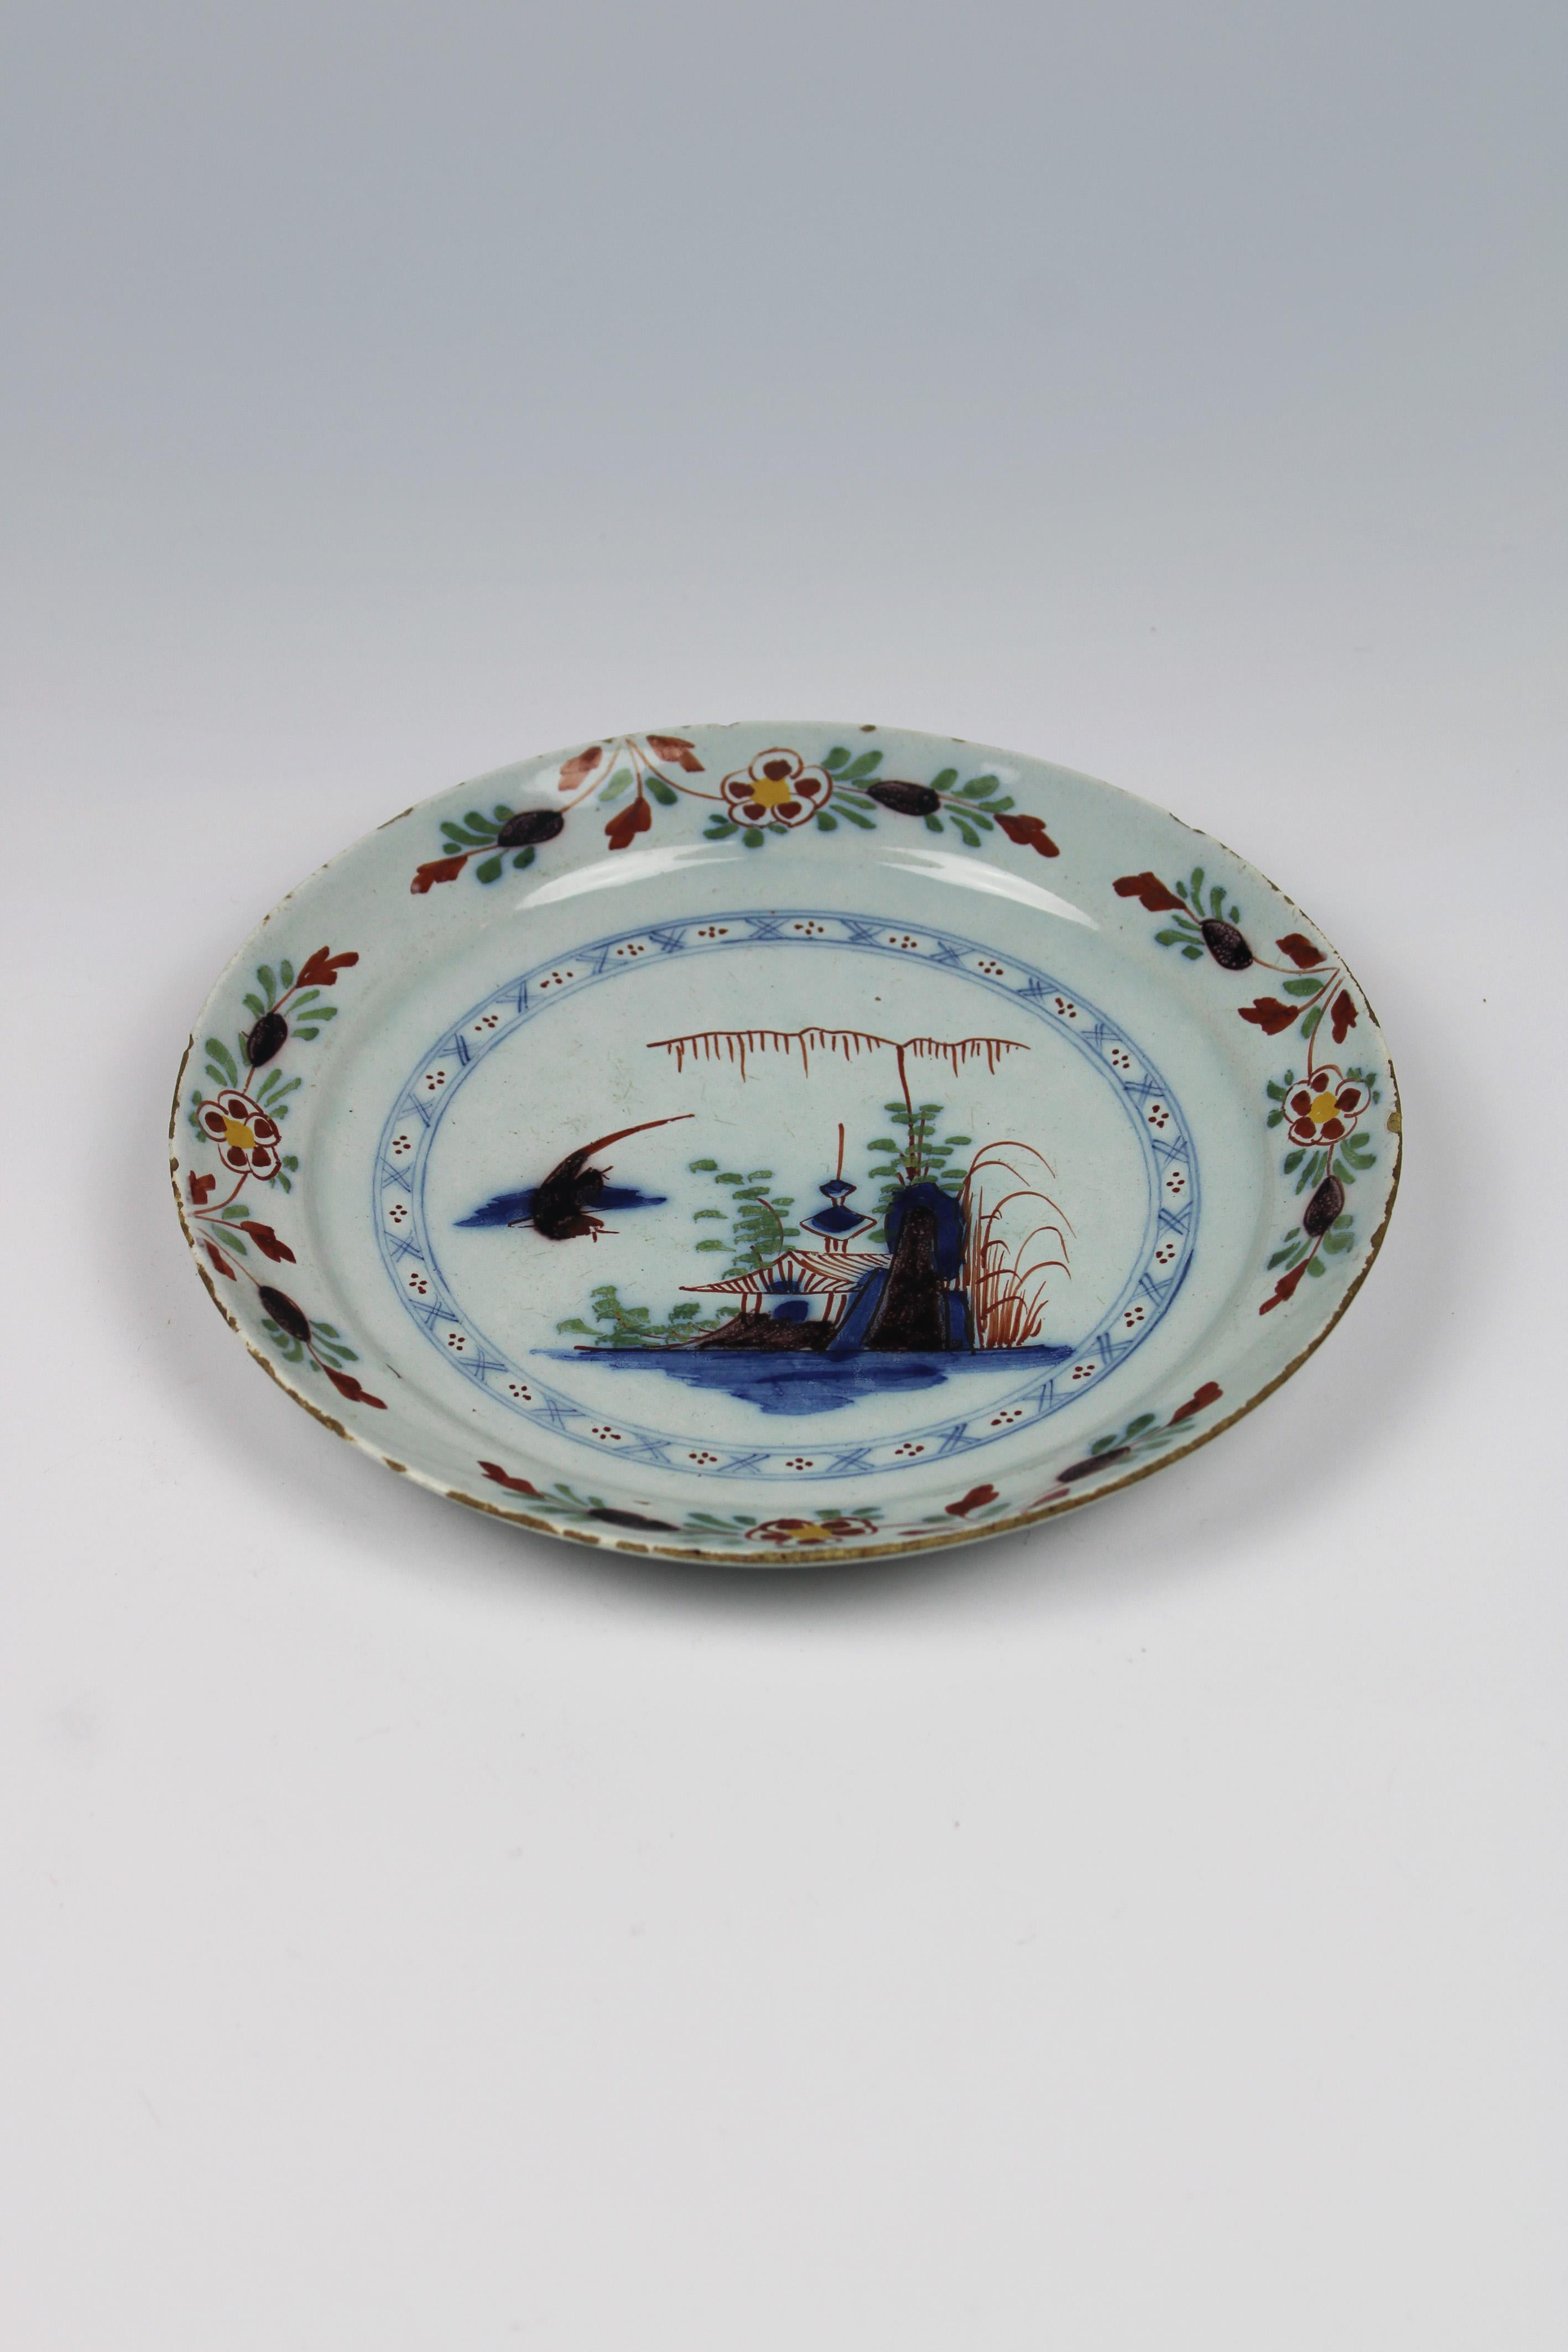 Transport yourself back in time to the 18th century with our exquisite Delft Glazed Pancake Dish, a true gem of polychrome earthenware craftsmanship from The Netherlands. This stunning dish embodies the timeless elegance and charm of traditional